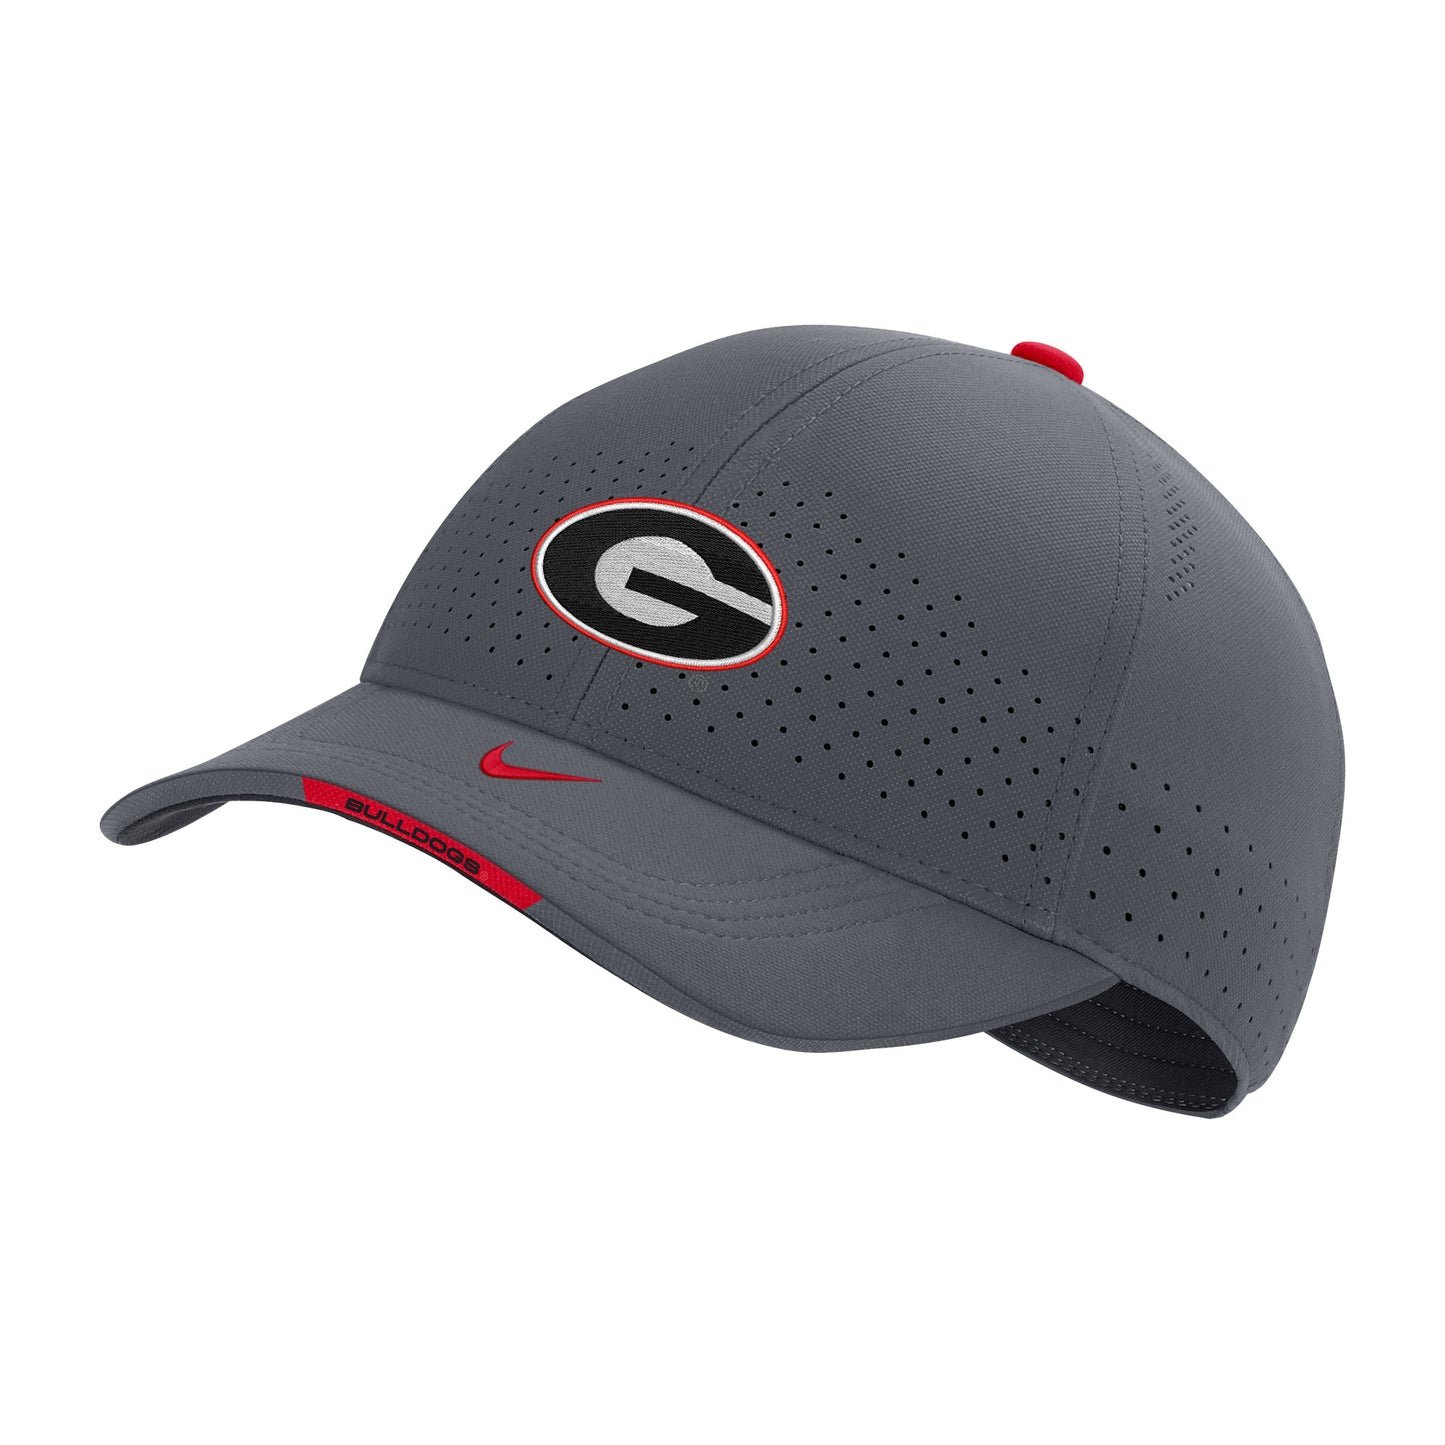 Red Nike Hat - Shop Premium UGA Apparel | The Clubhouse Athens